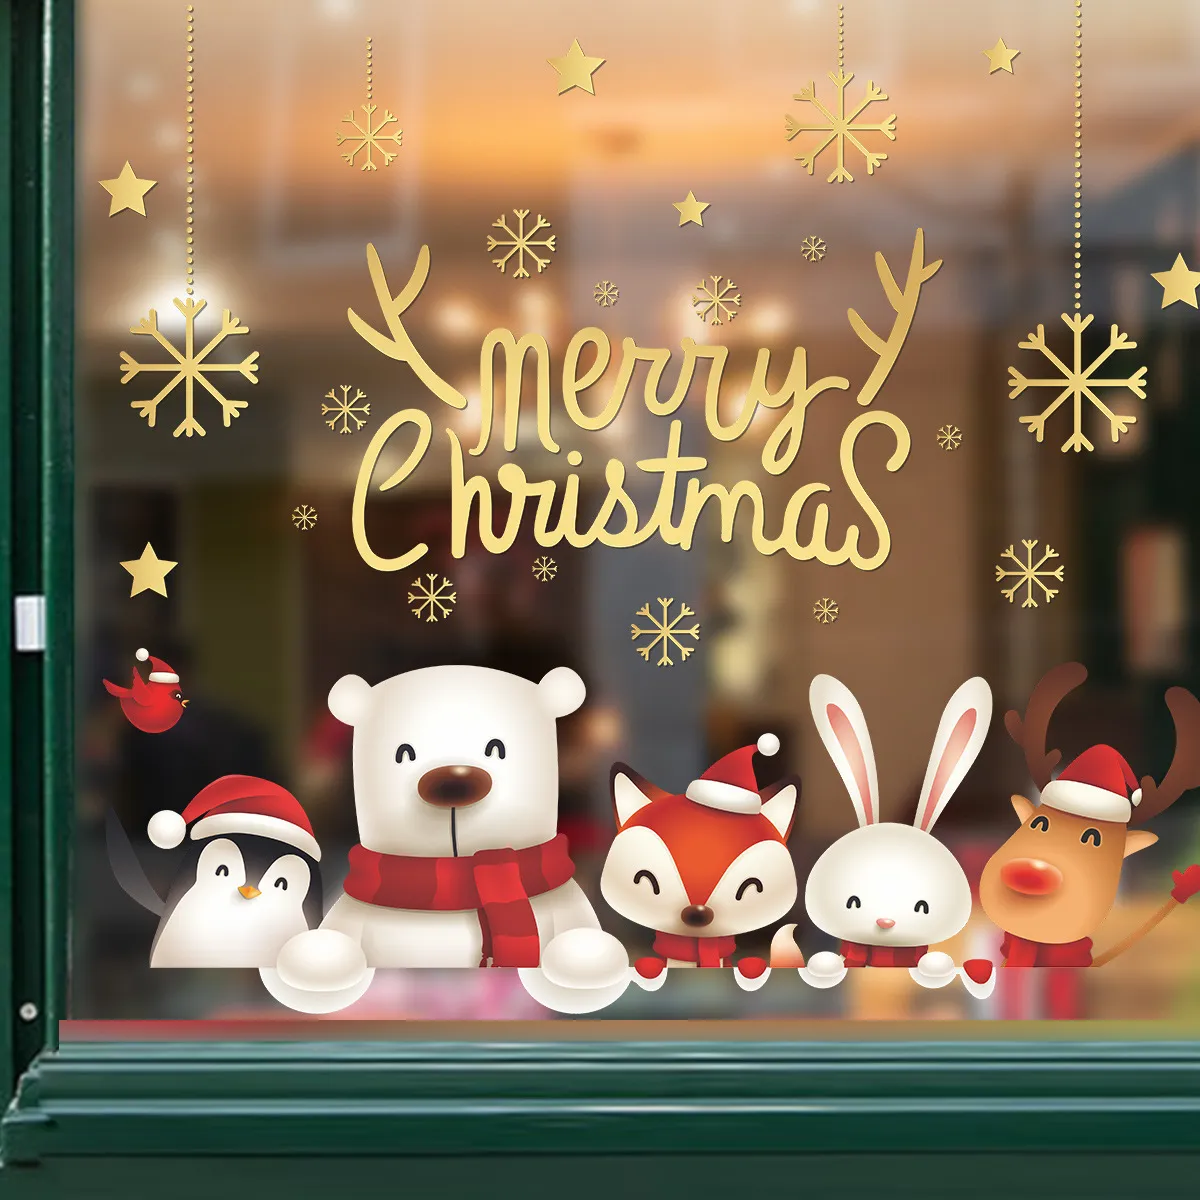 Santa Claus Merry Christmas Wall Stickers Glass Windows Decals Decor Christmas Home Decoration Wallpaper 2022 New Year Stickers